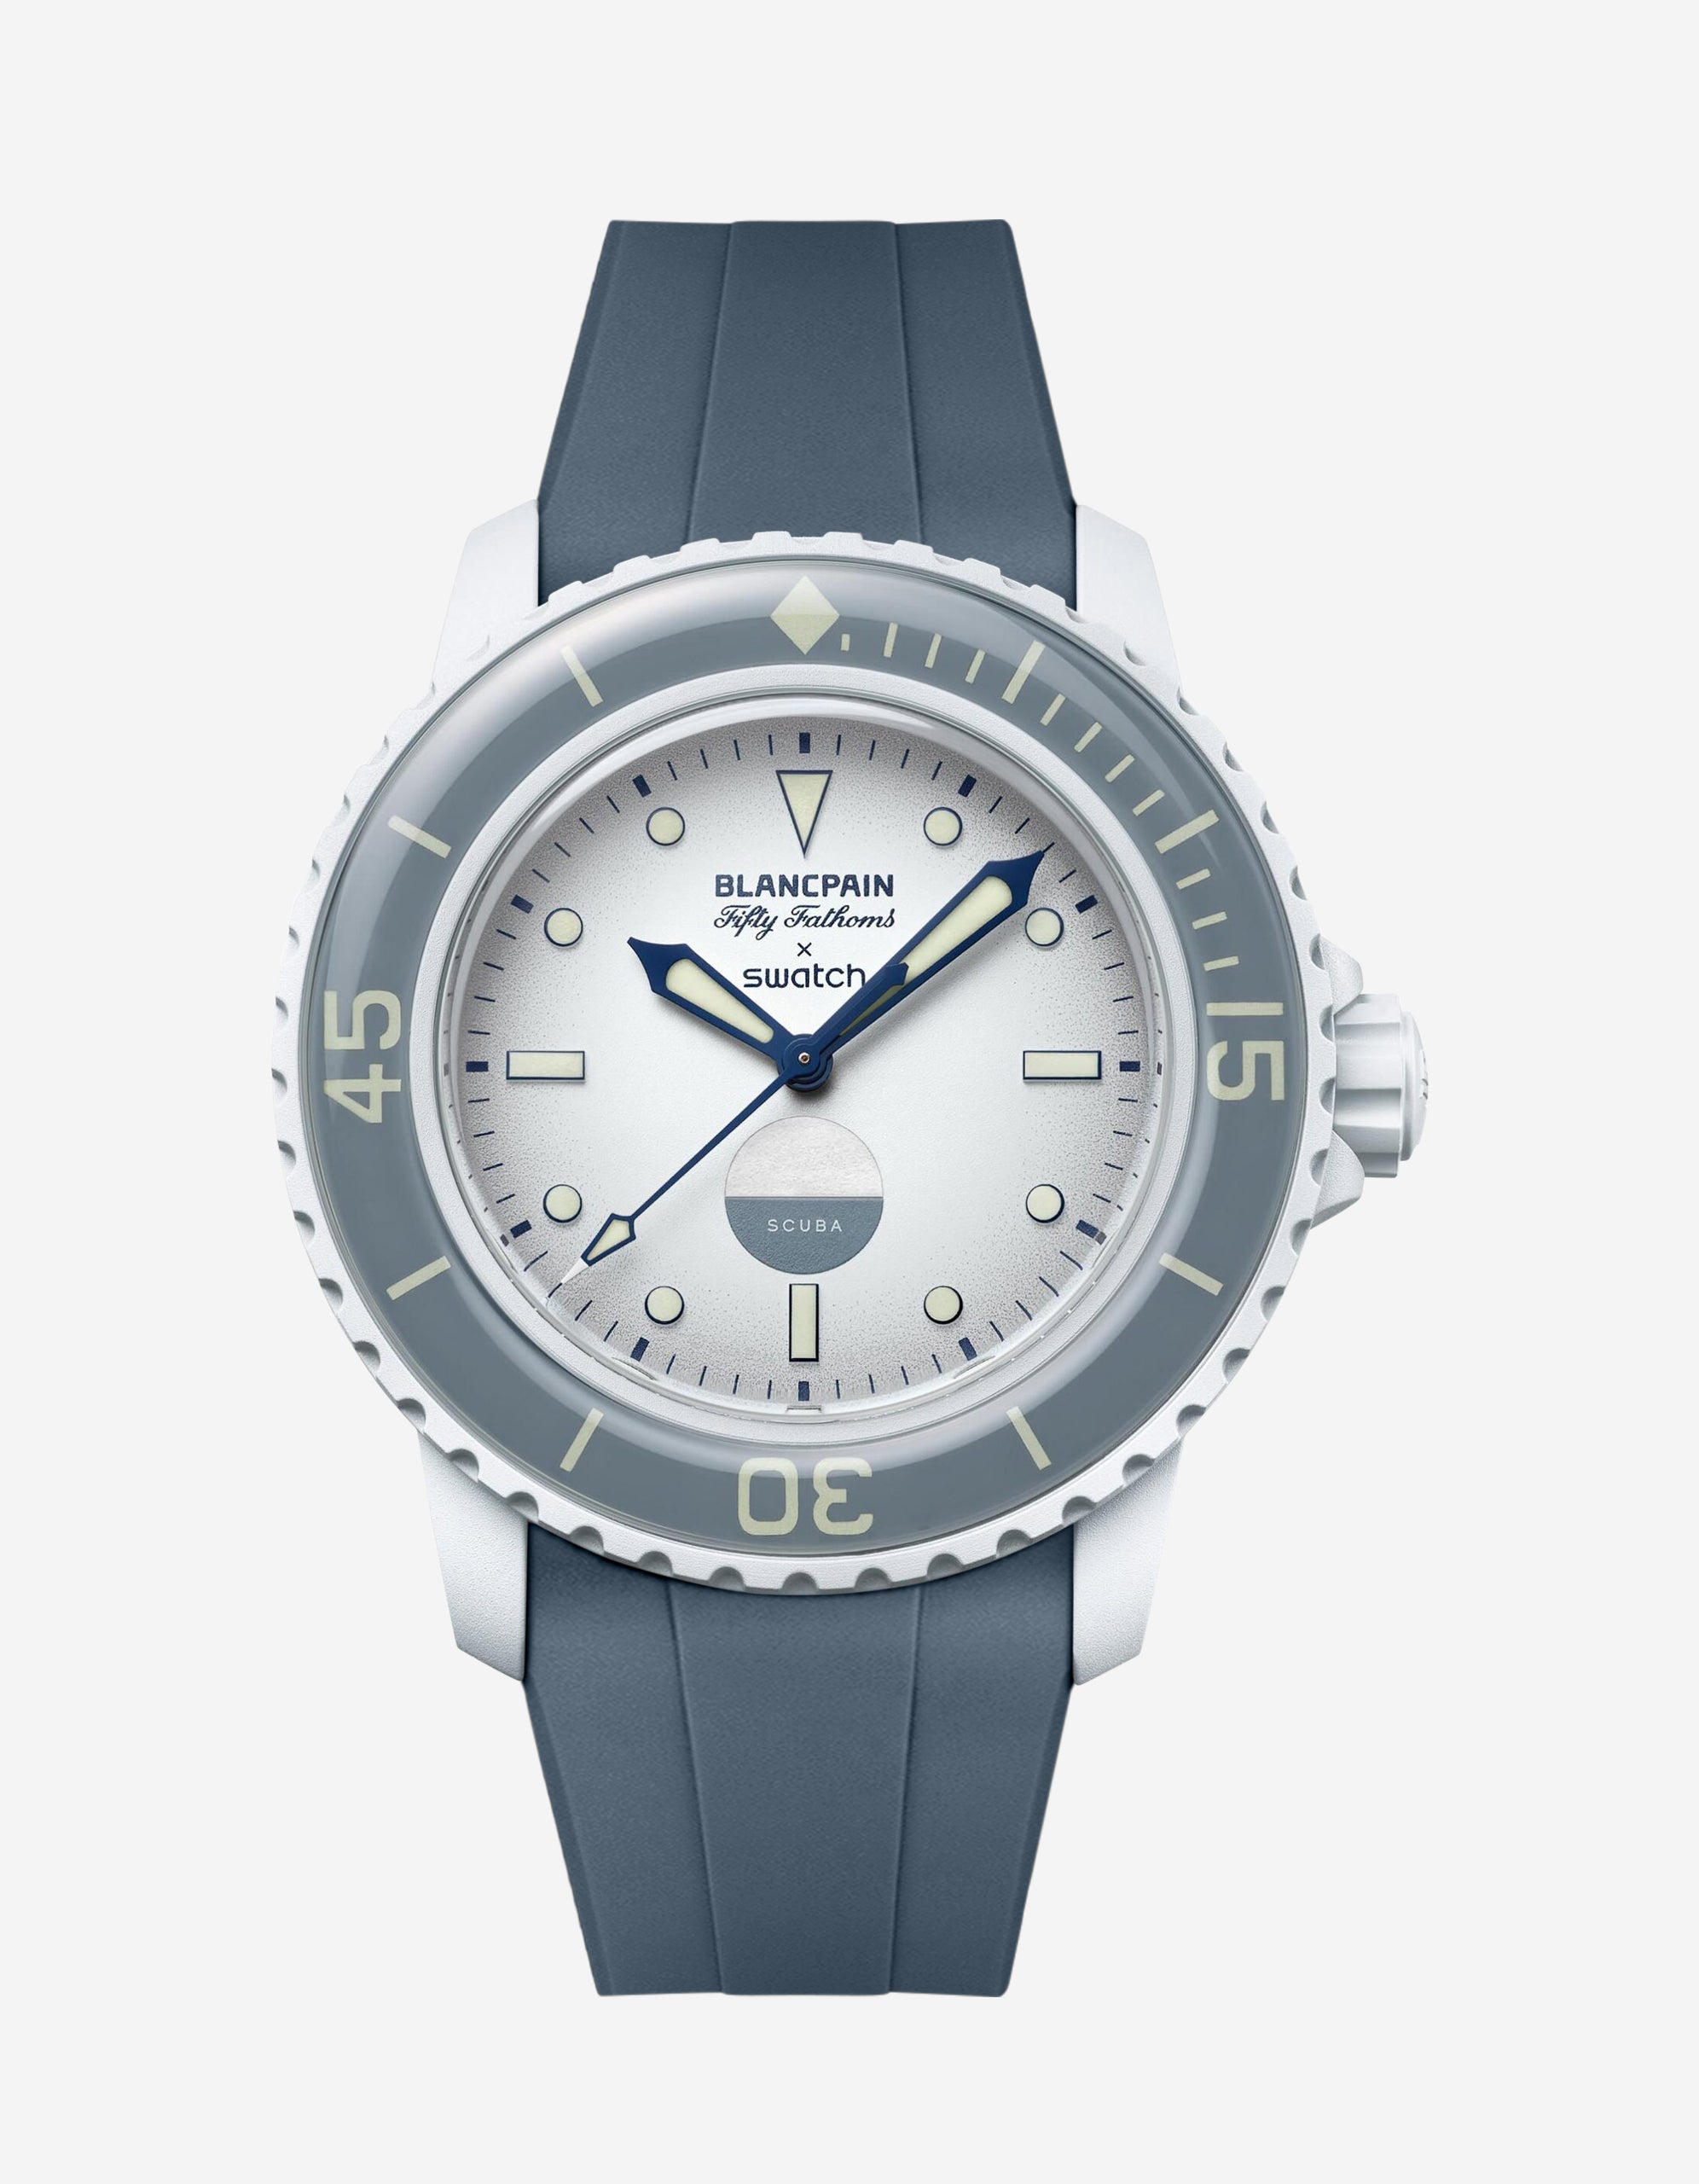 Rubber Strap for Blancpain X Swatch Antarctic Ocean